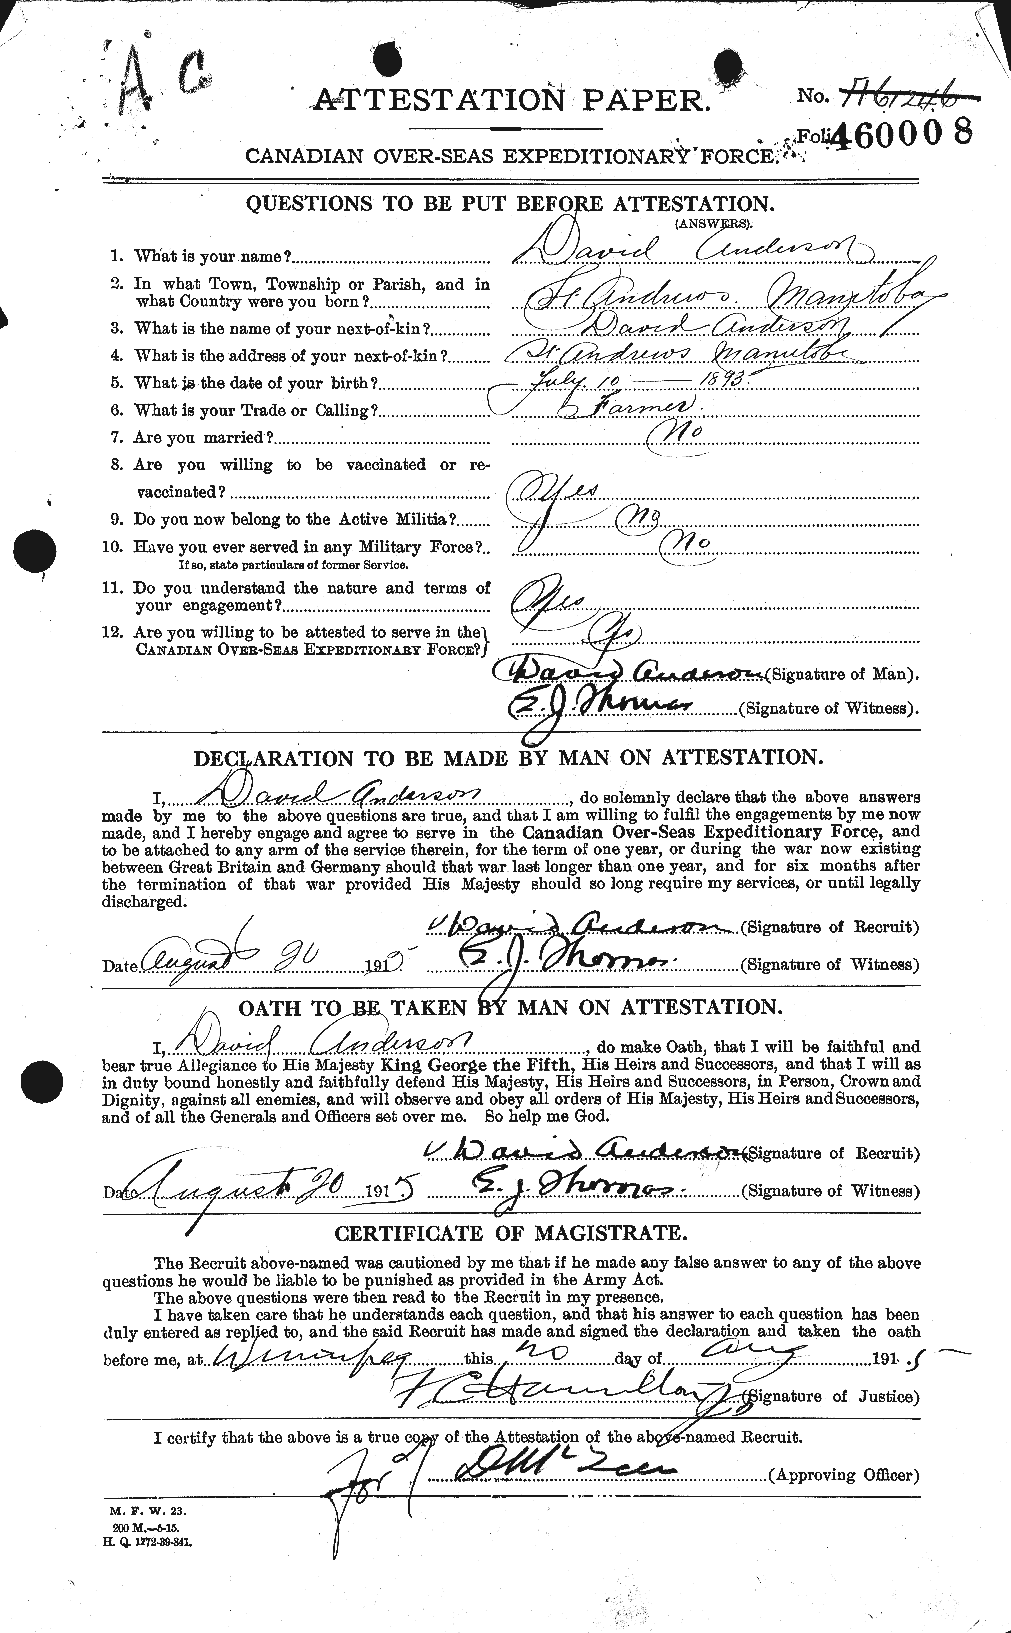 Personnel Records of the First World War - CEF 210024a